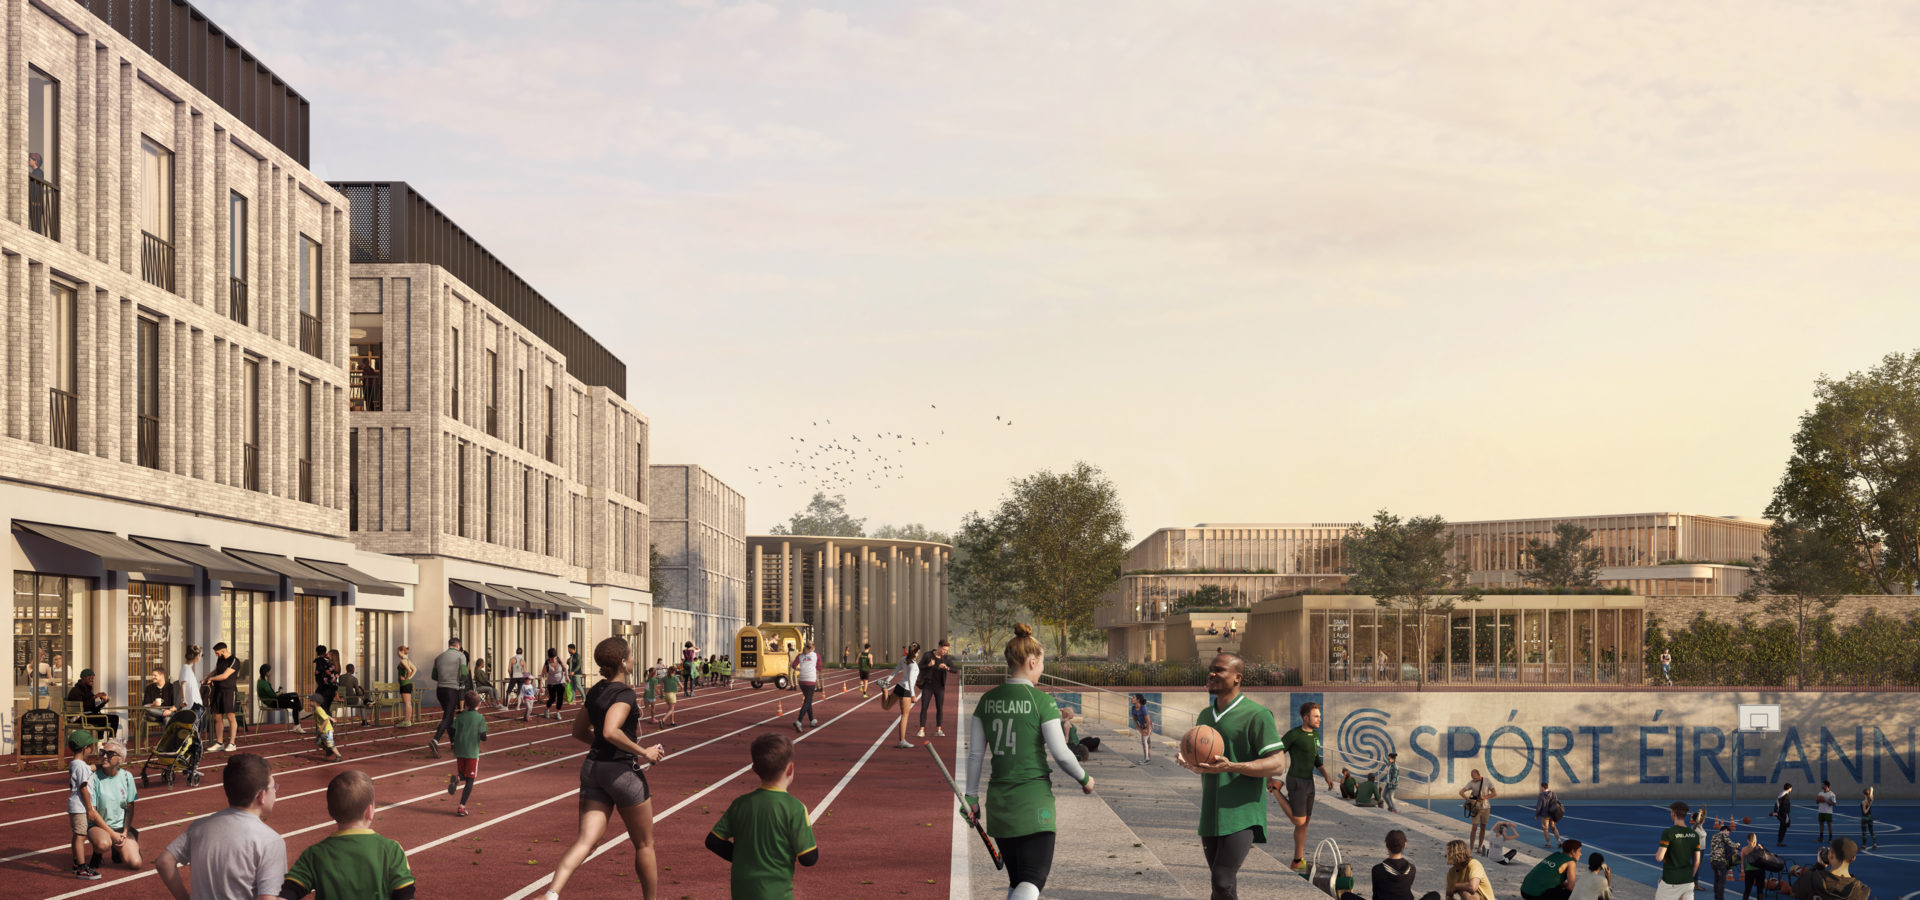 Sport Ireland Campus Masterplan Launched Faulknerbrowns Architects Hh